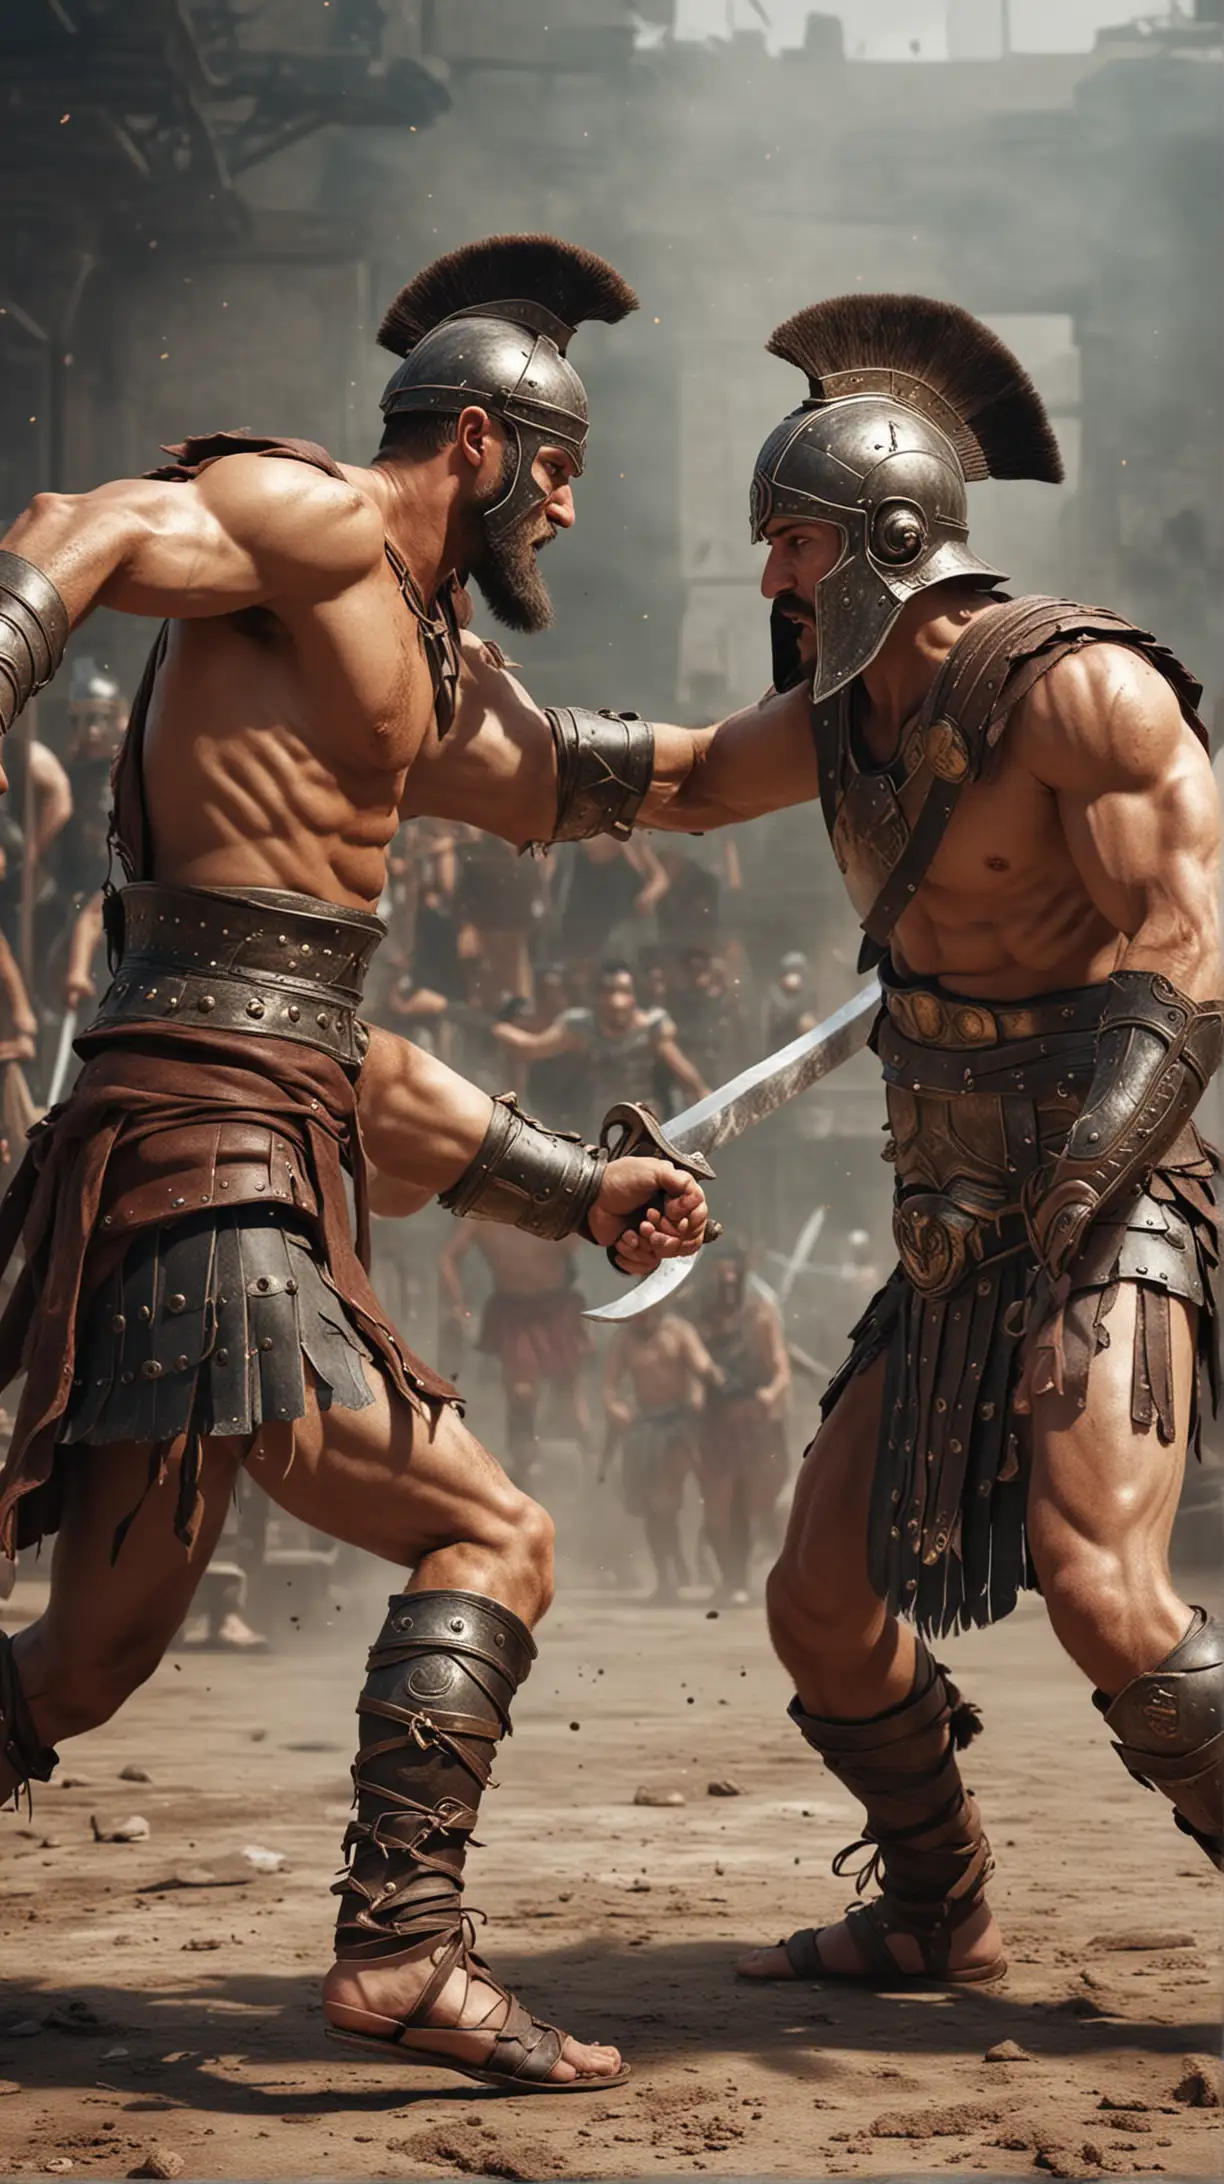 ancient gladiator`s fighting. Hyper realistic